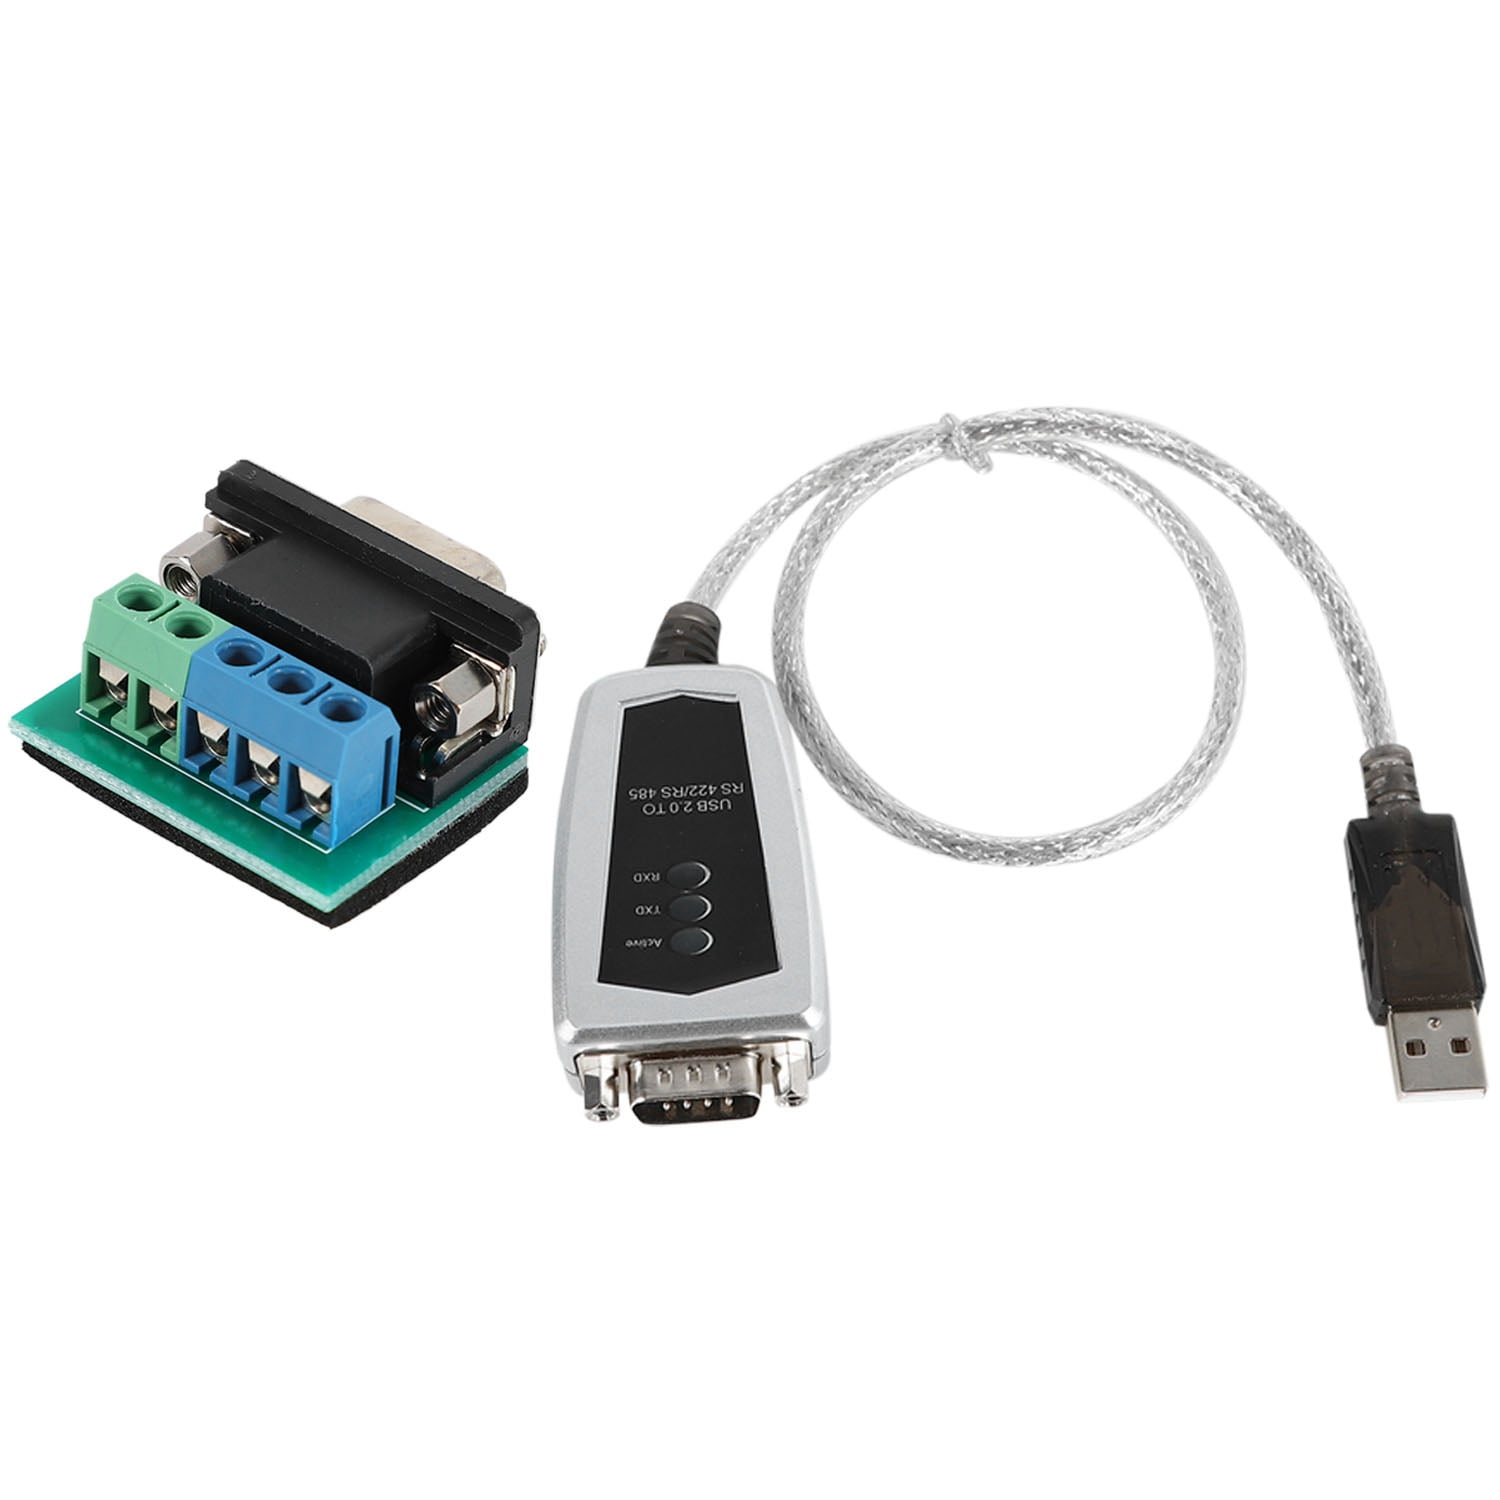 USB to RS422 Serial Converter Adapter Cable FTDI Chip for Windows 10 8 7,XP and Mac -